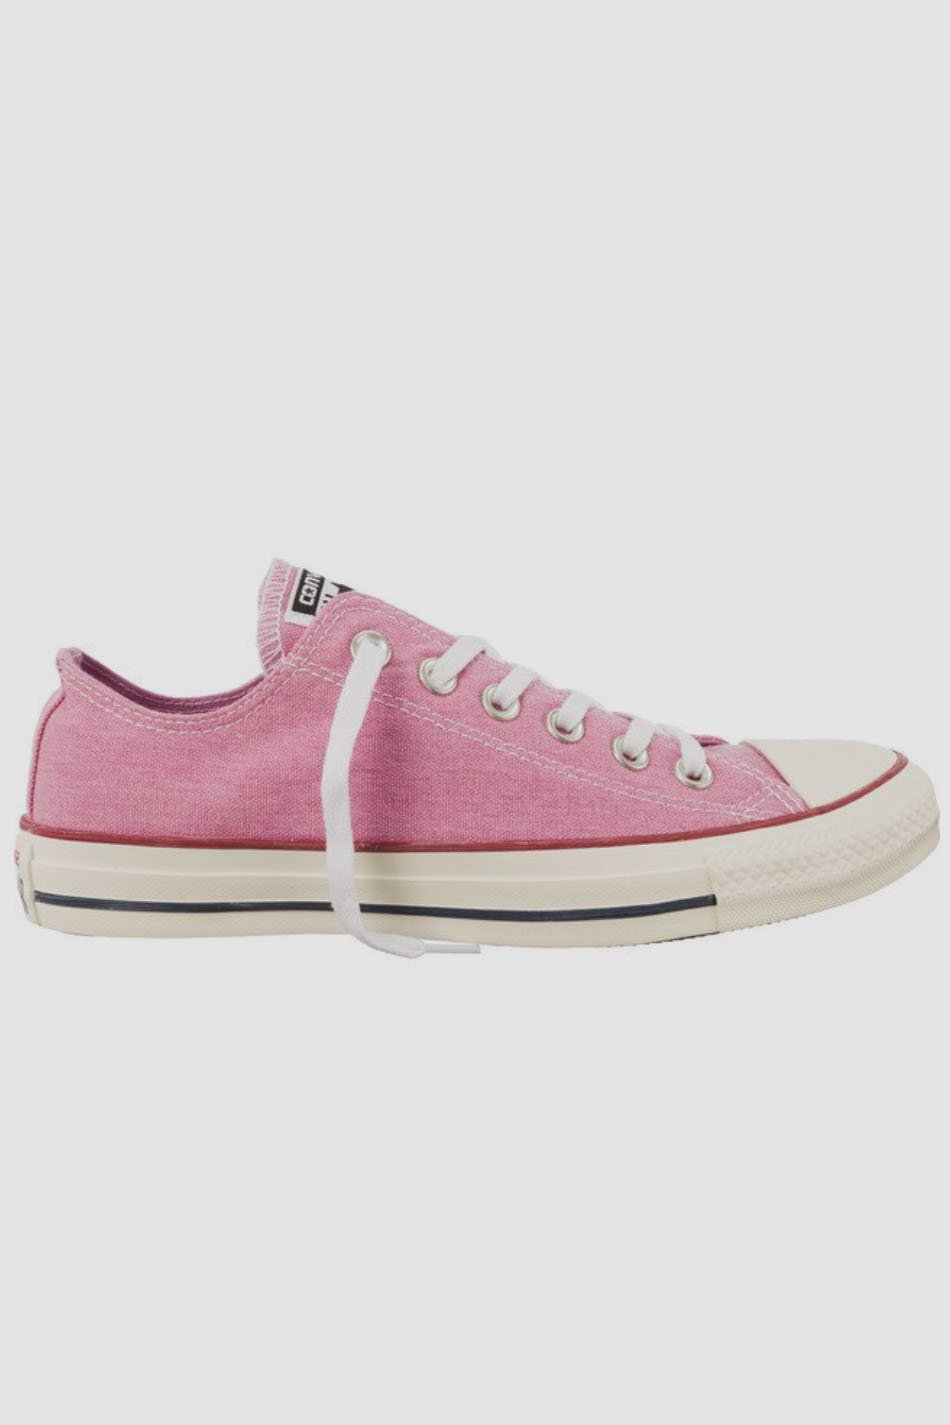 Converse All Star Ox Orchid